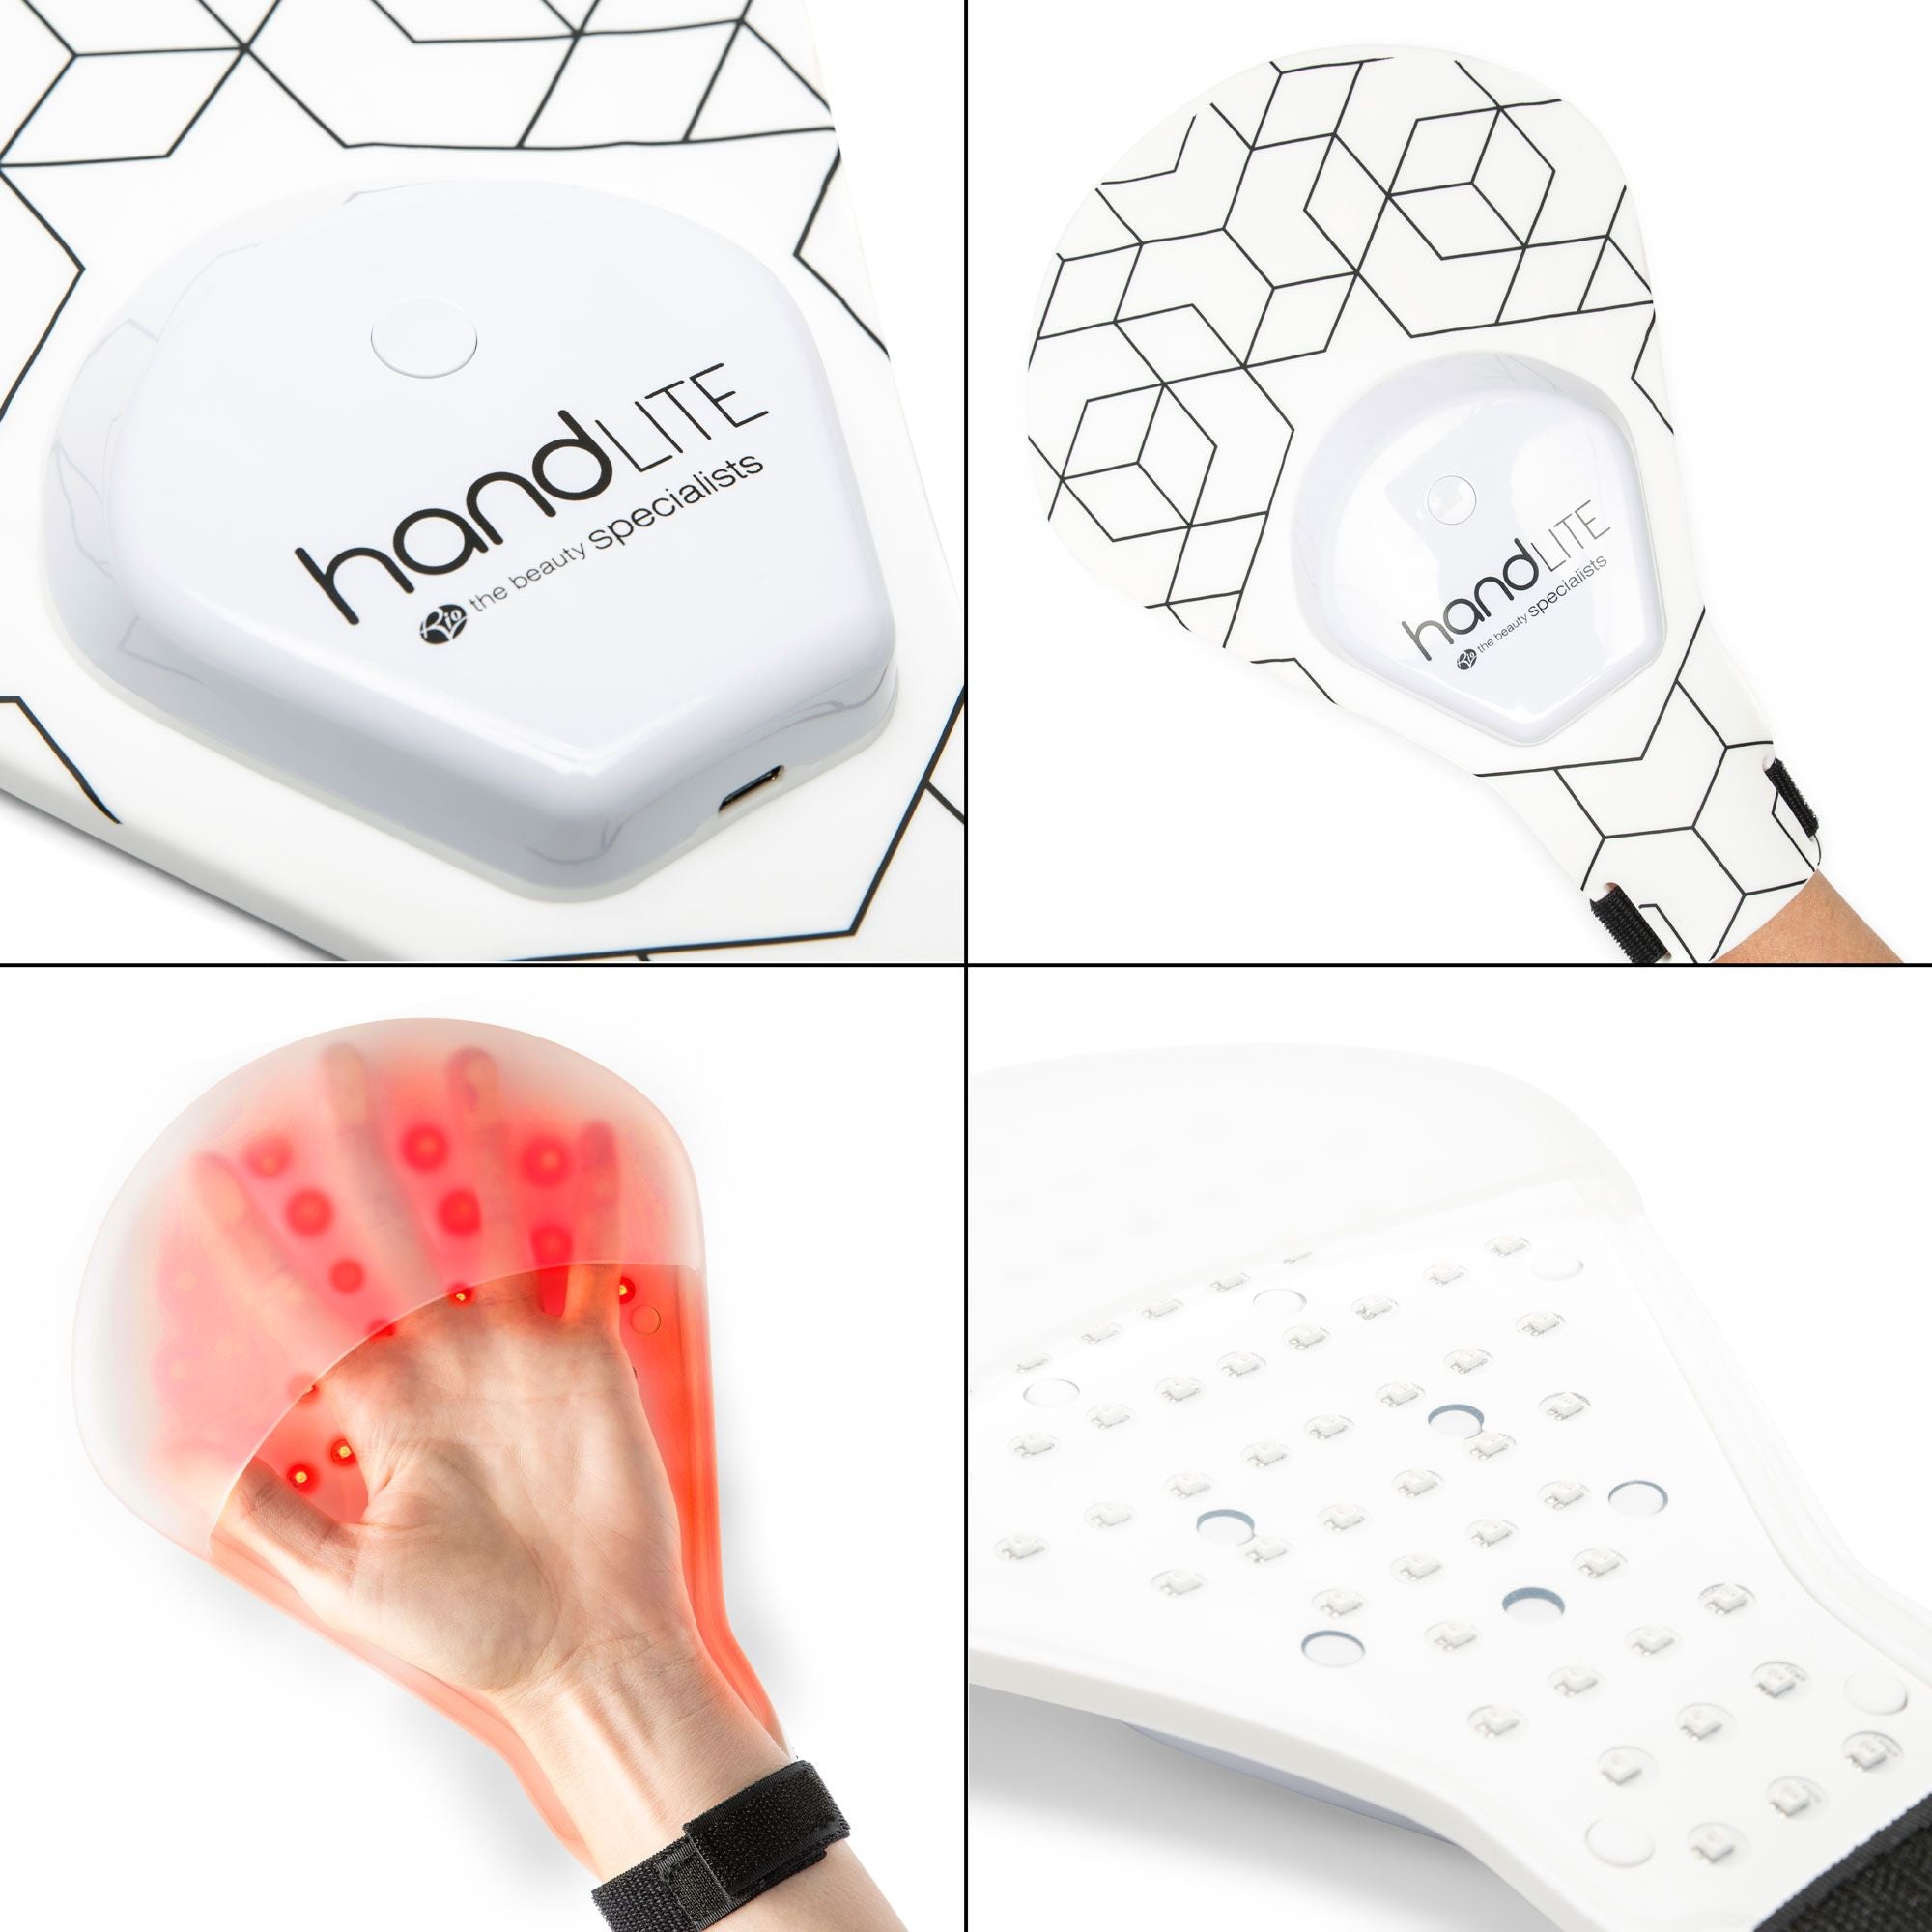 4 small images of the handLITE LED light treatment glove showing various features.